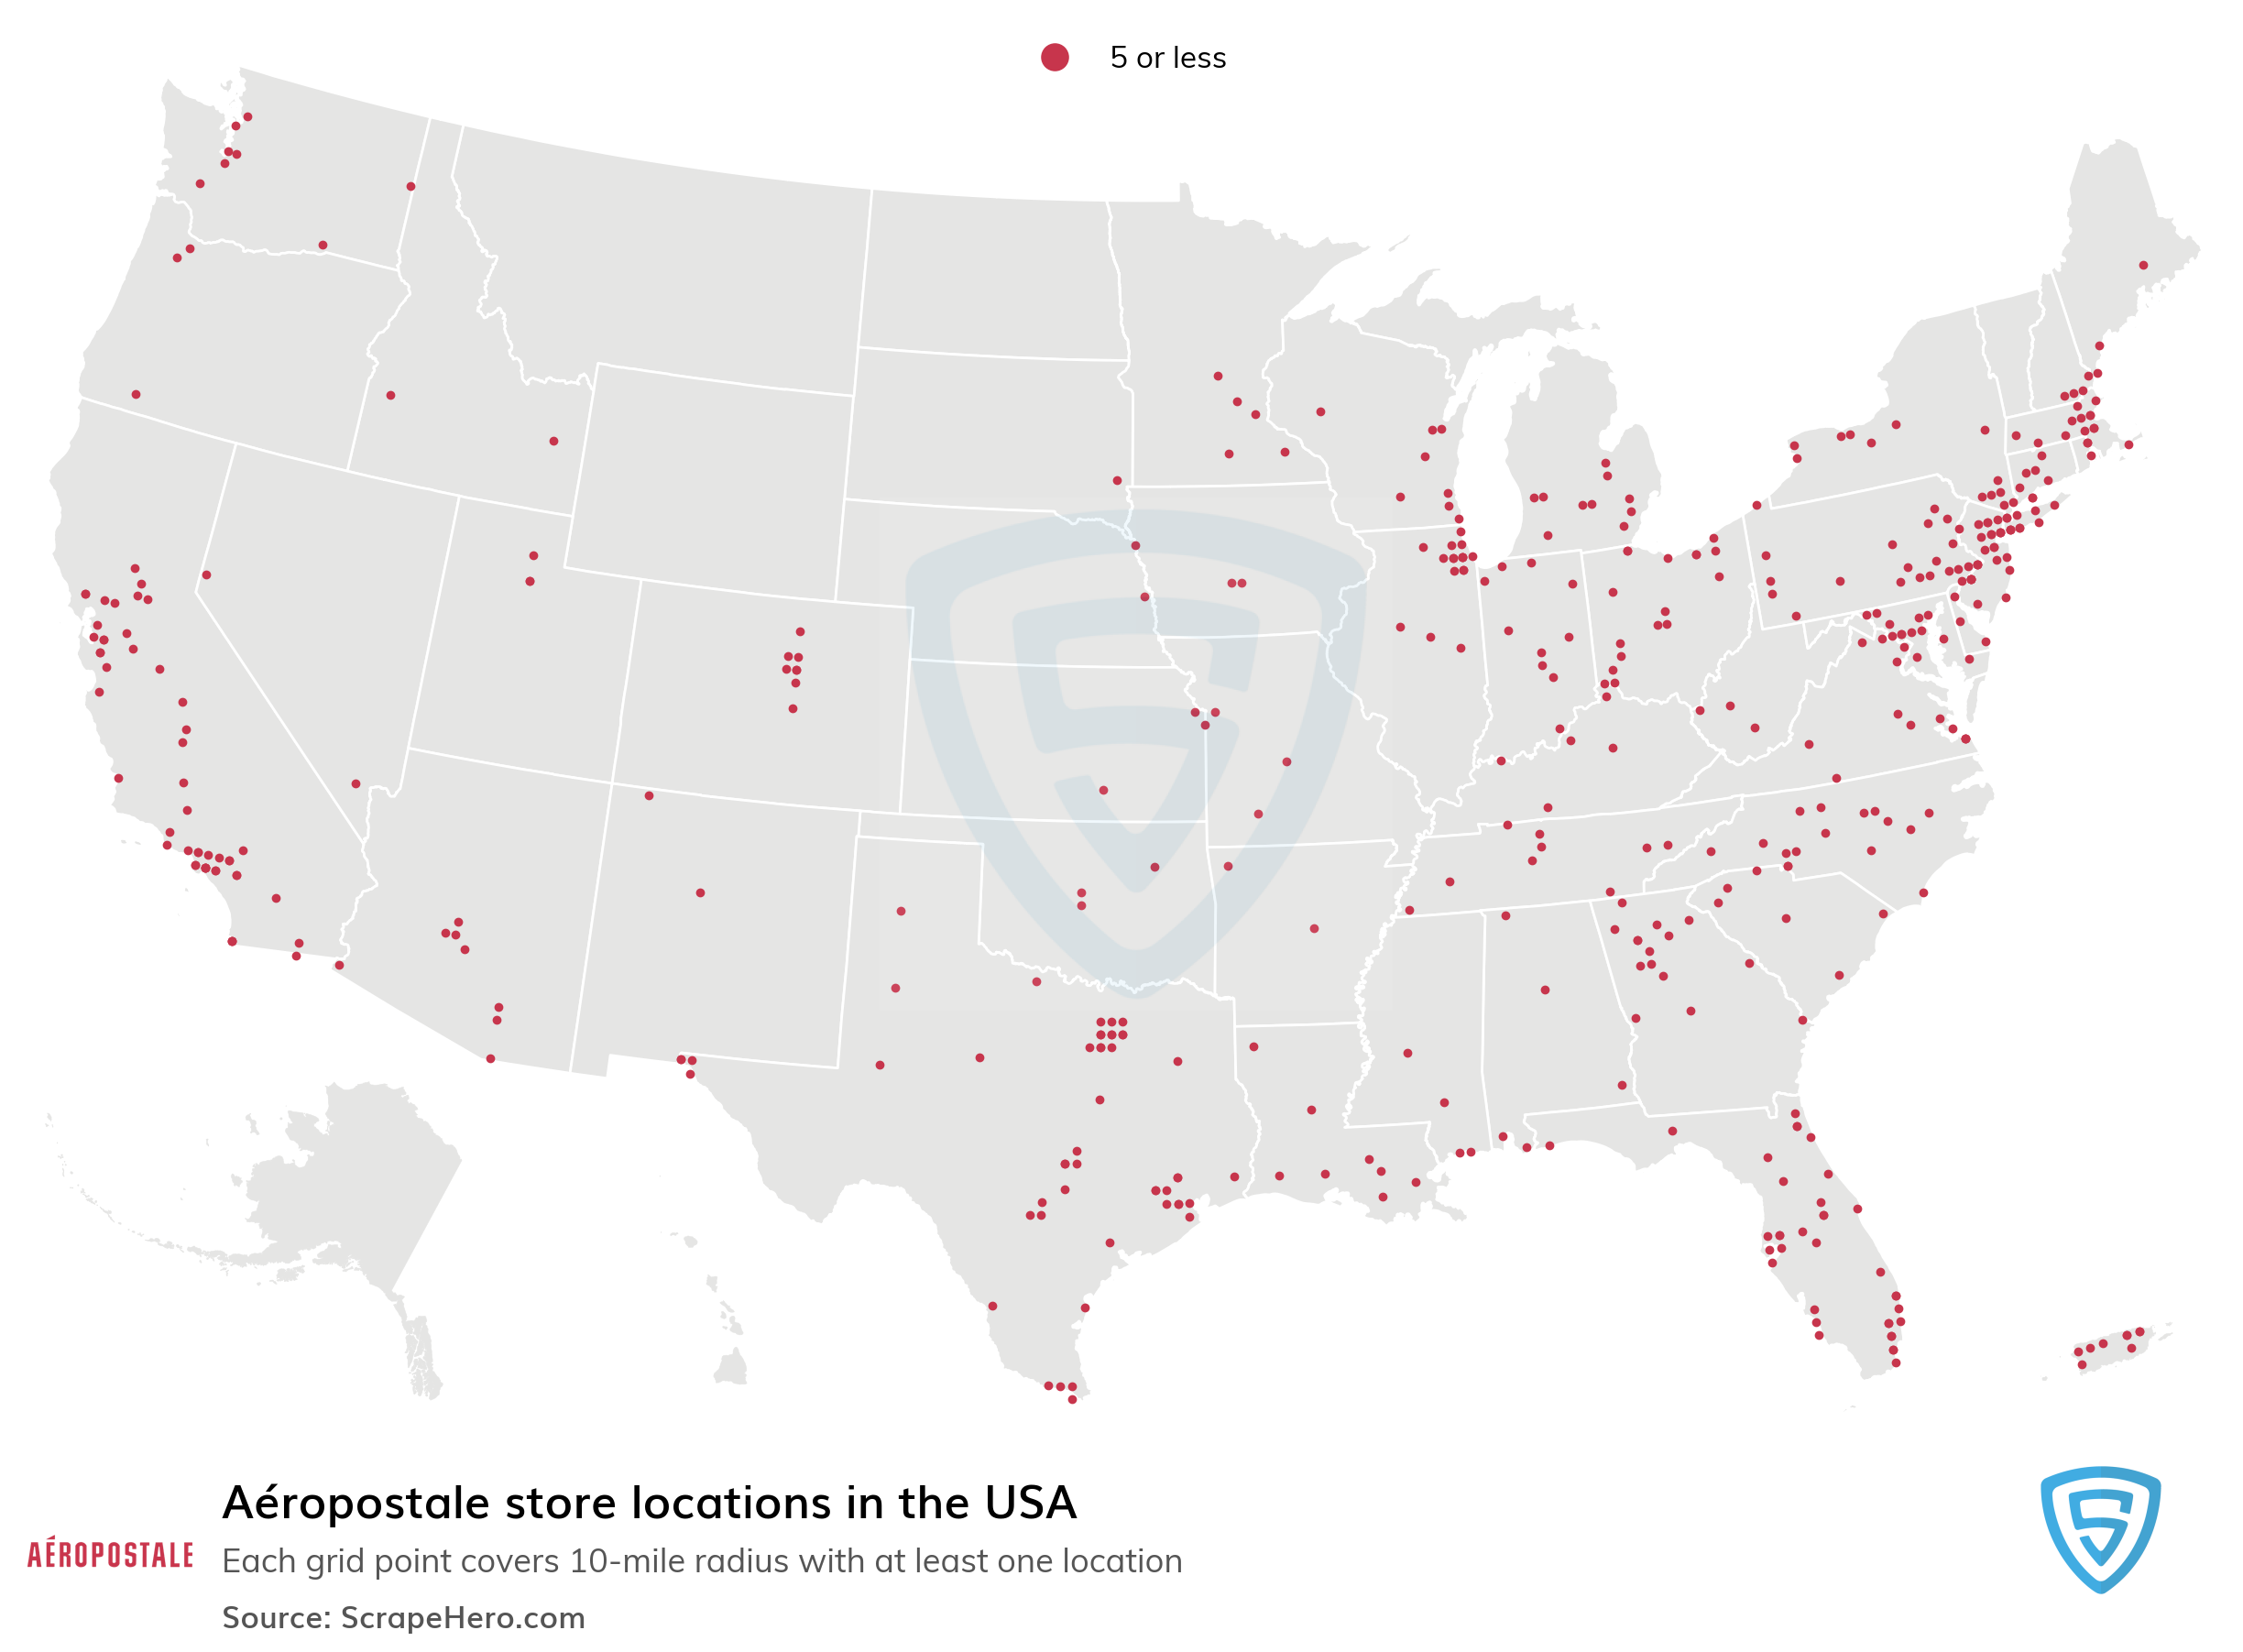 List all Aéropostale store locations in the USA - Data Store